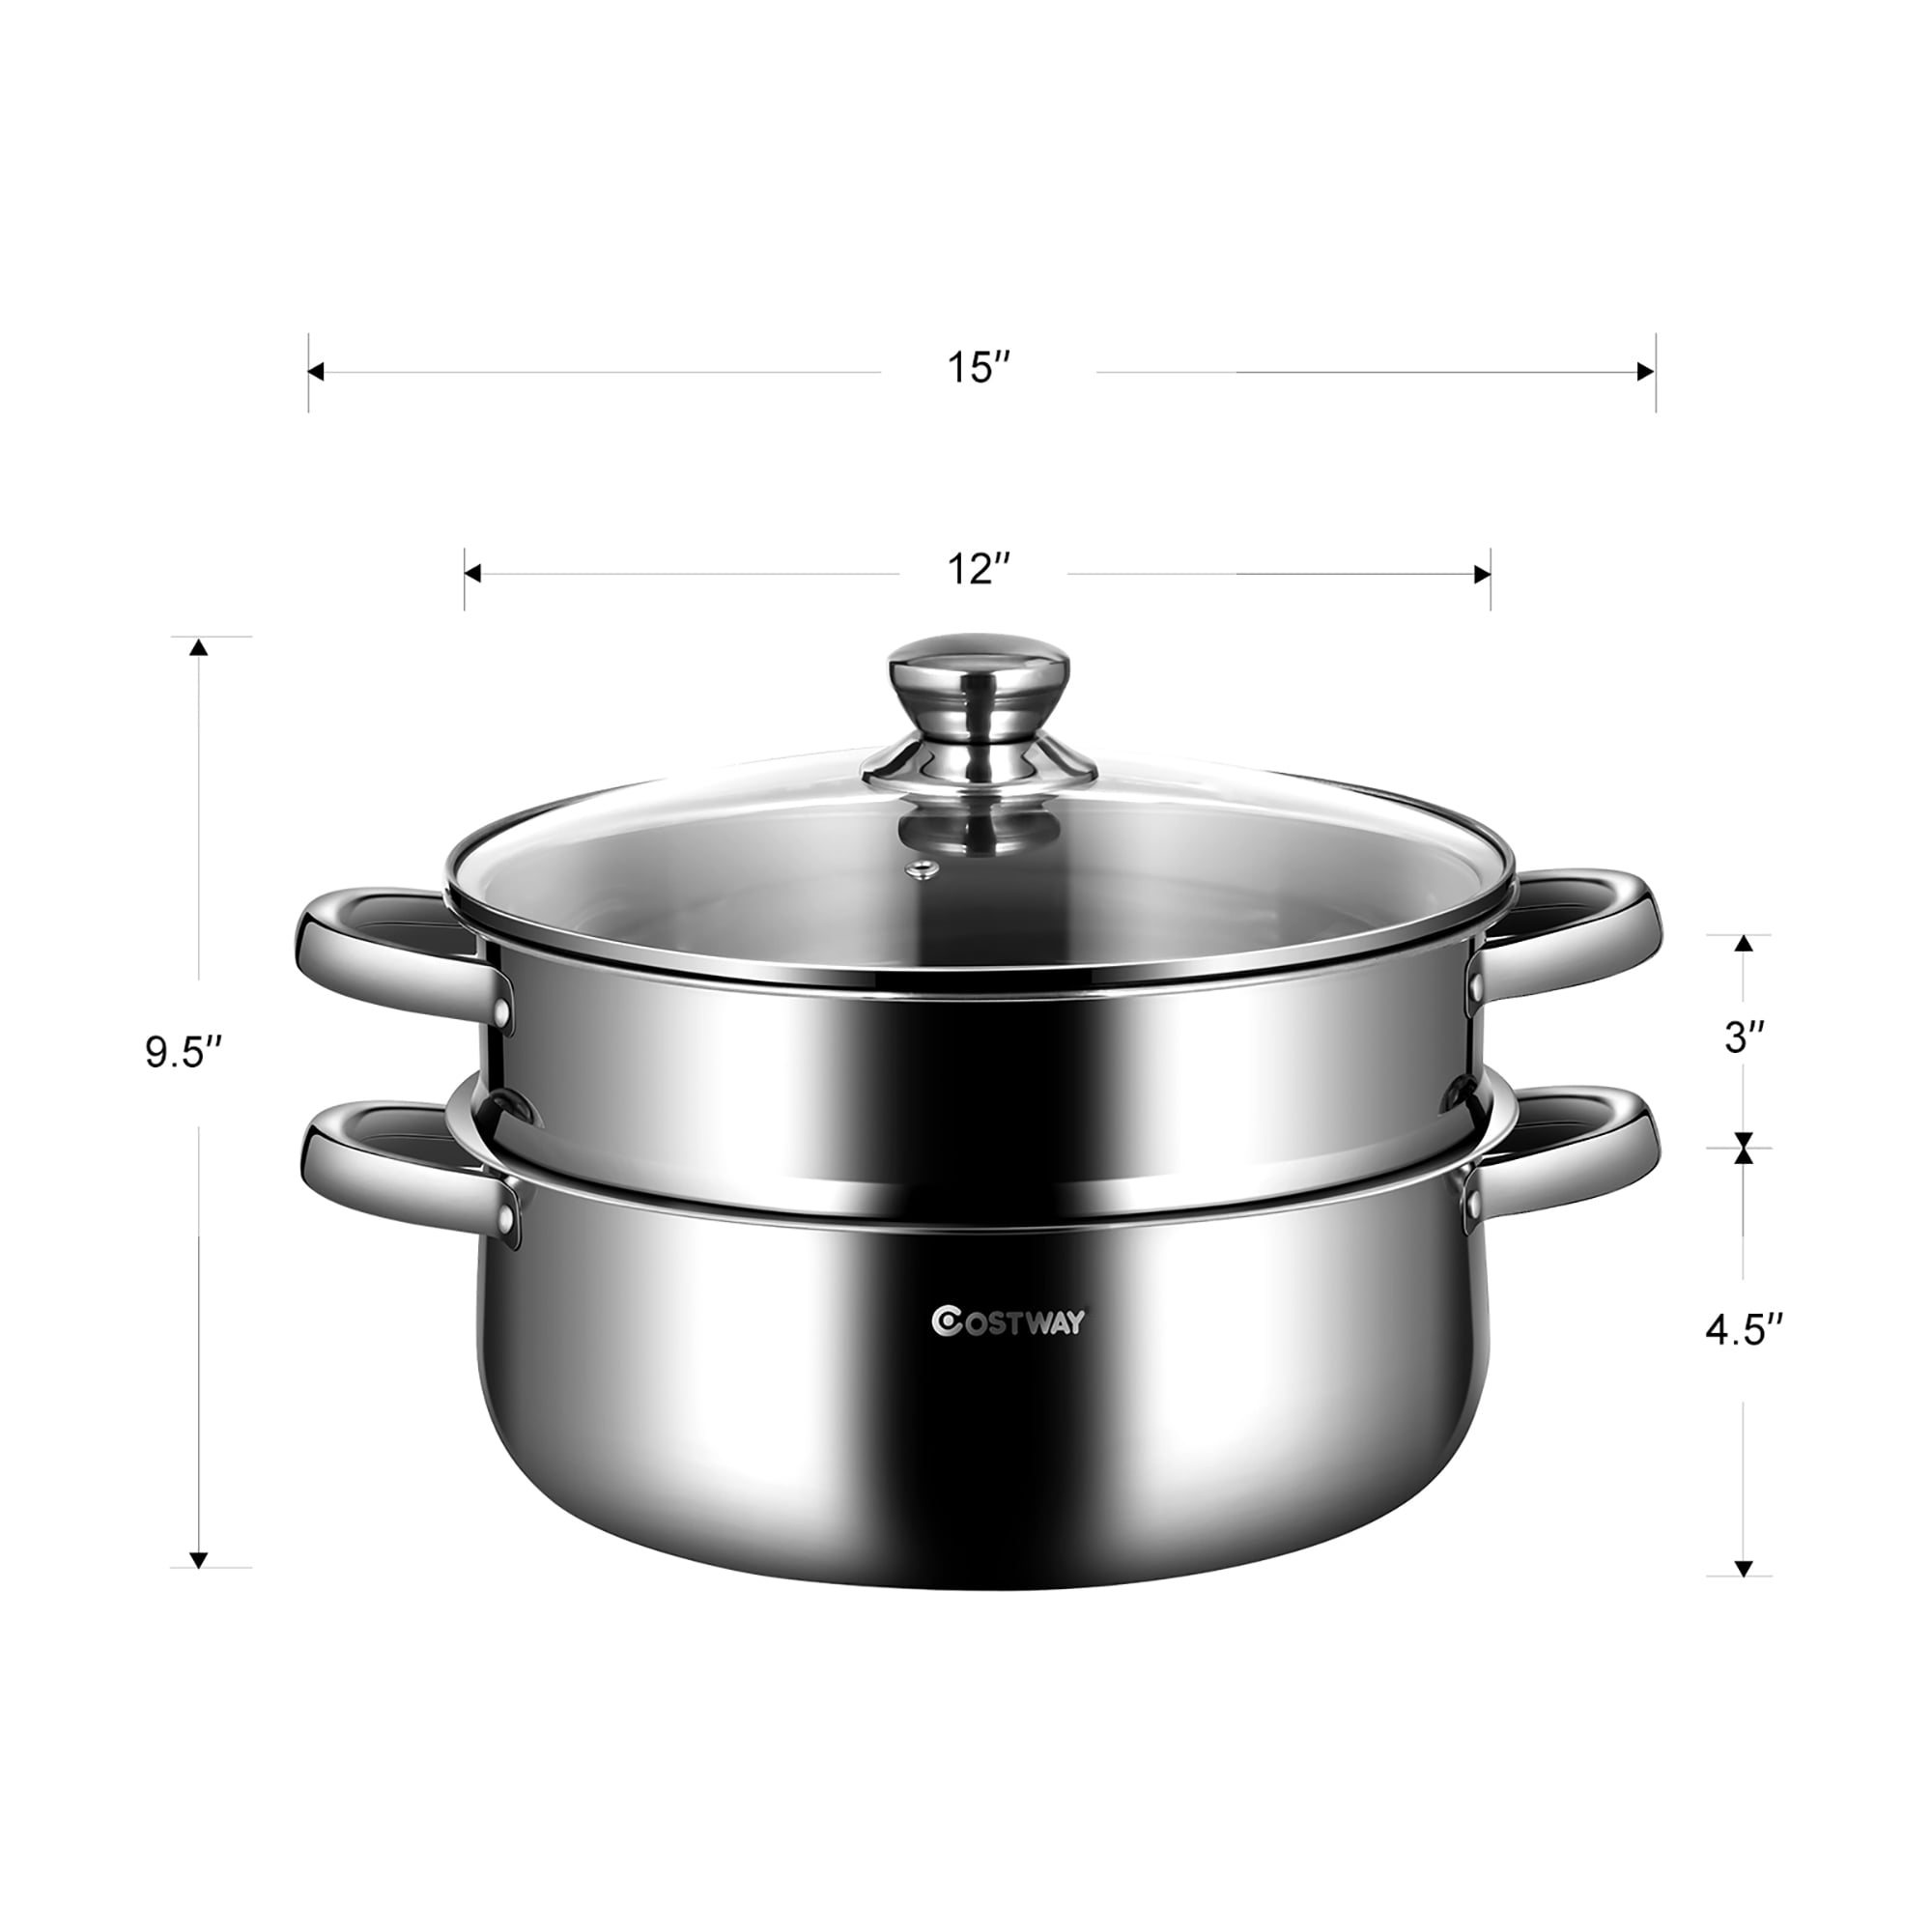 Large 34cm 36cm 38cm 2 Tier Stainless Steel Double use Pot Steamer and Wok  Set